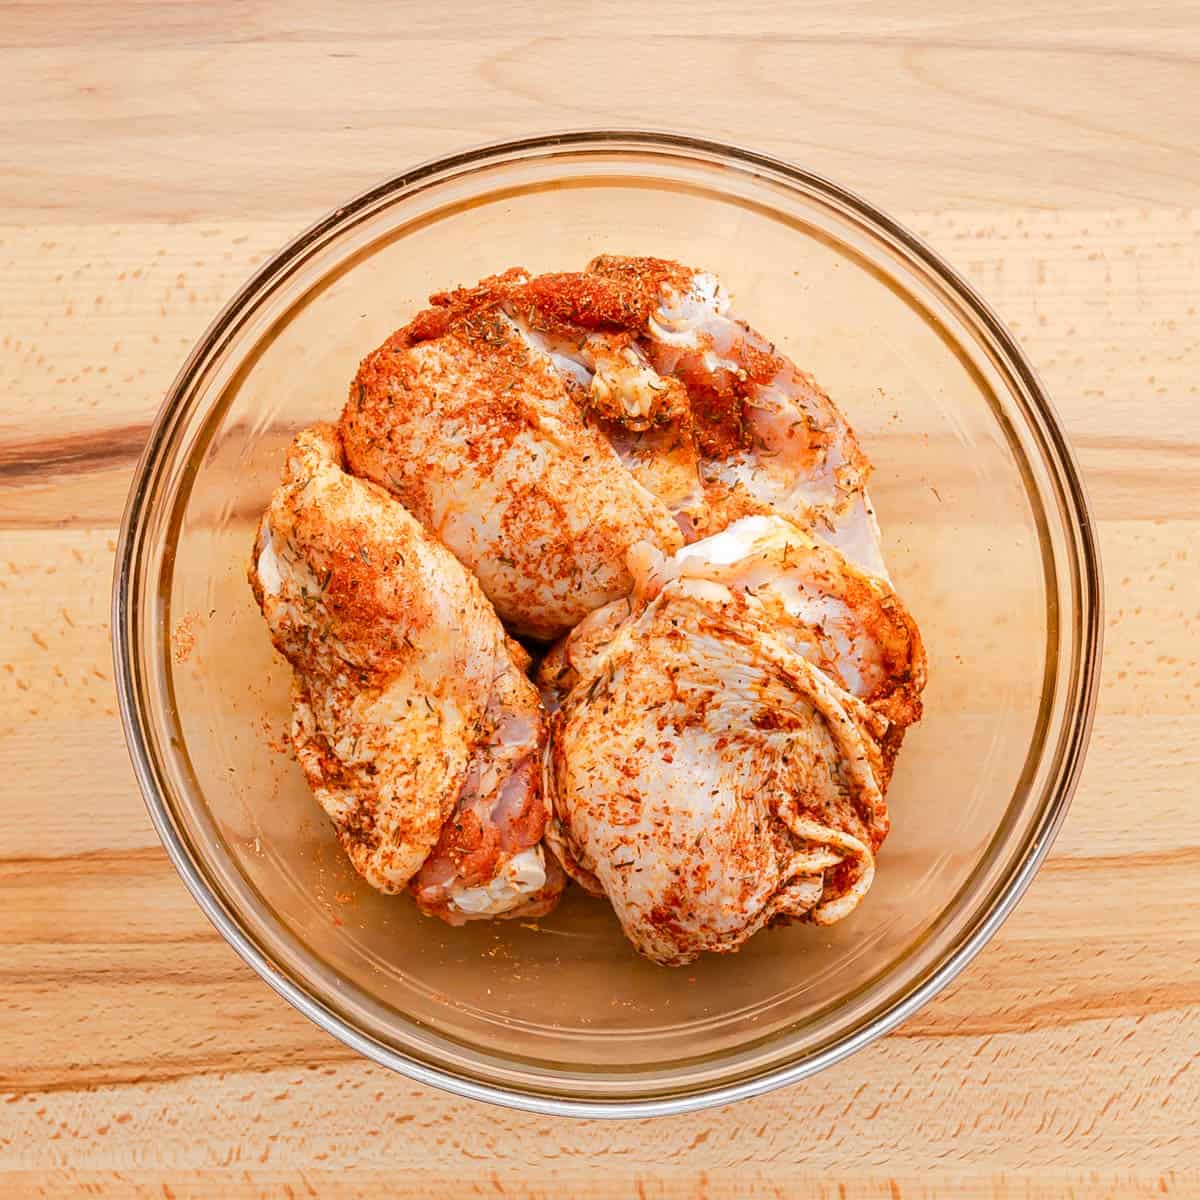 Use paper towels to dry the chicken thighs, then season them all over with smoked paprika, salt, garlic powder, and dried thyme.